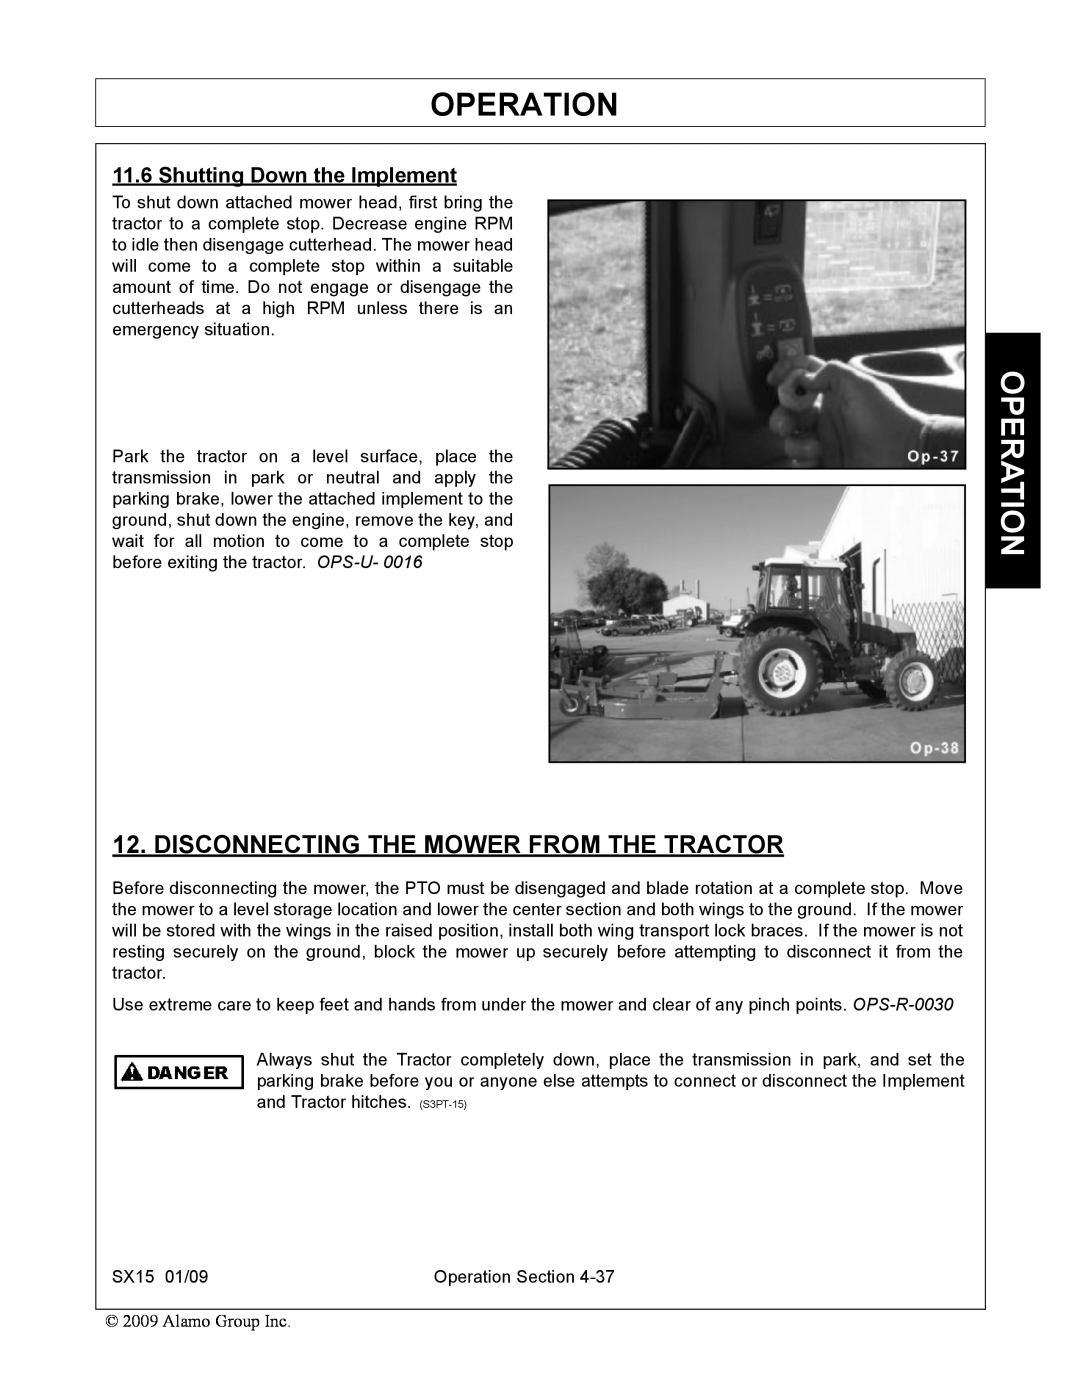 Alamo SX15 manual Disconnecting The Mower From The Tractor, Shutting Down the Implement, Operation 